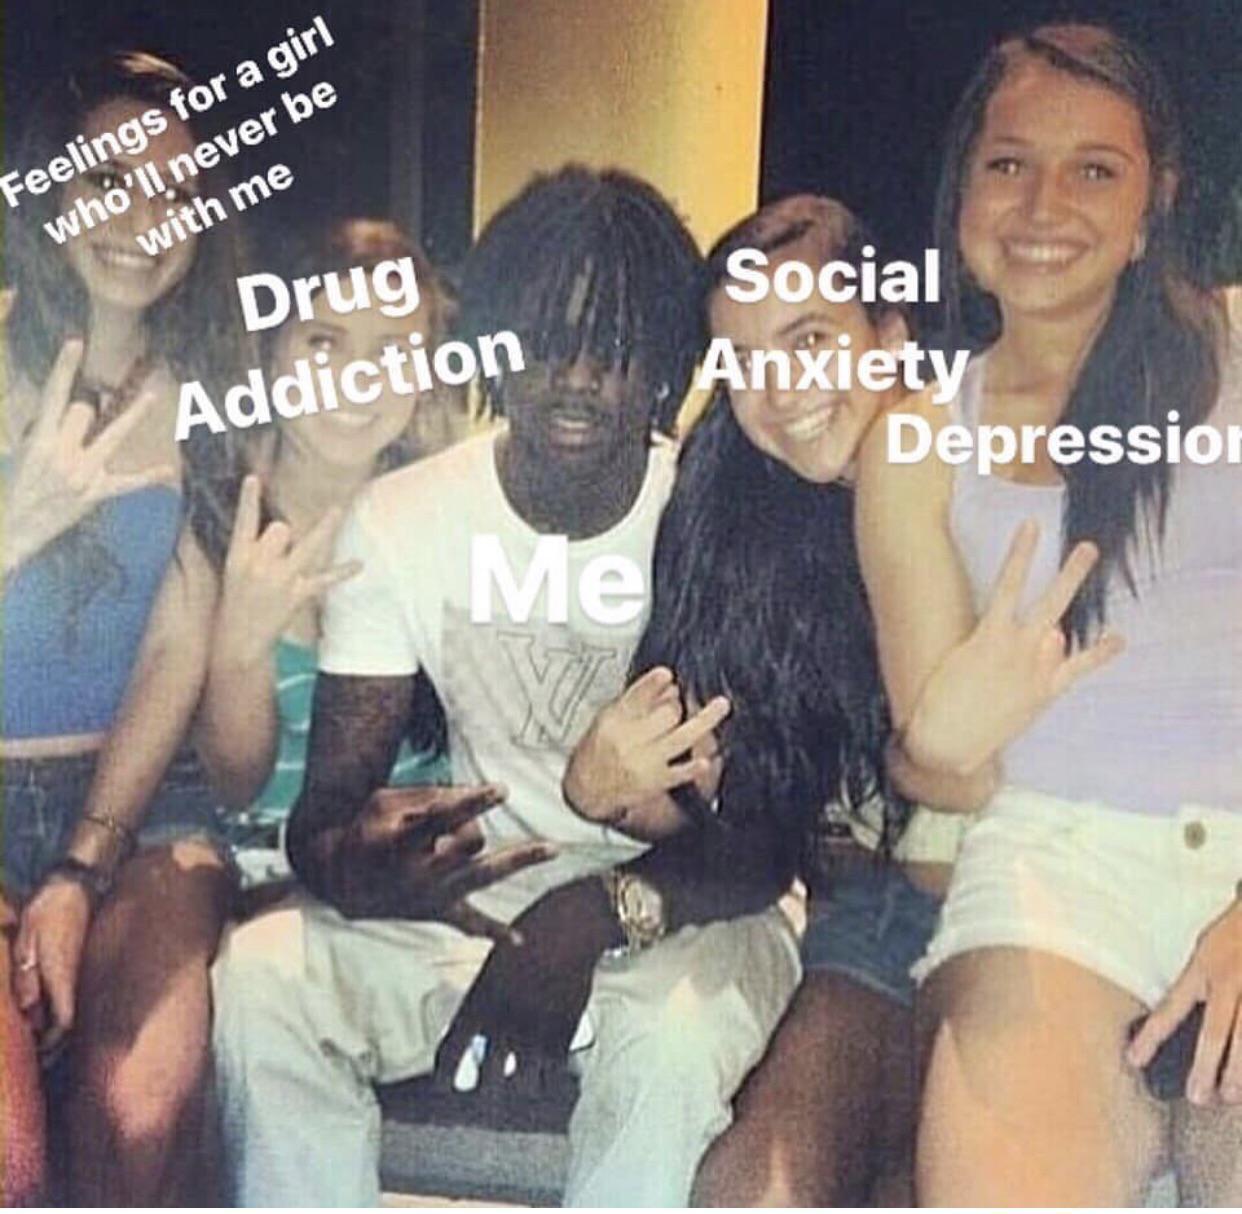 chief keef with girls - Feelings for a girl who'll never be with me Social Drug ddiction Anxiety Depression